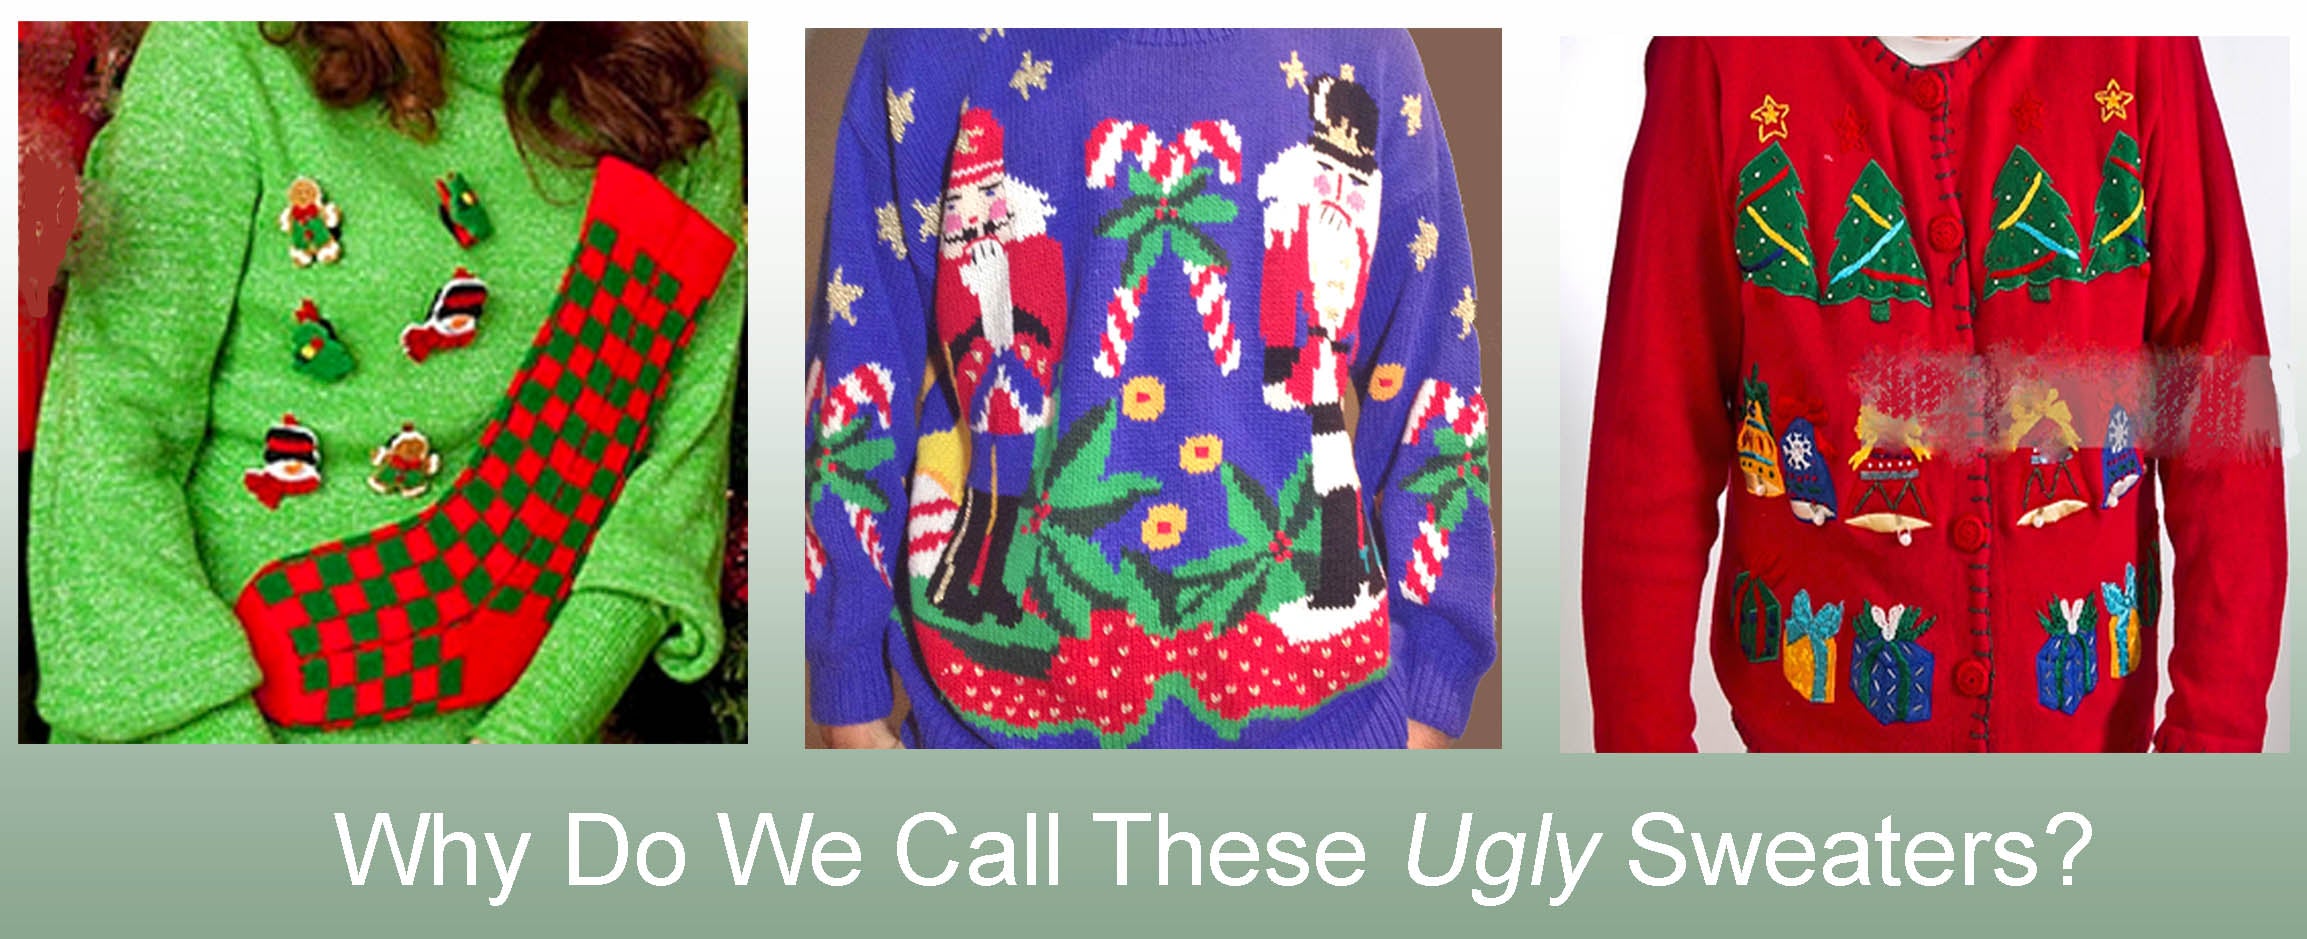 Why Are They Called Ugly Sweaters?